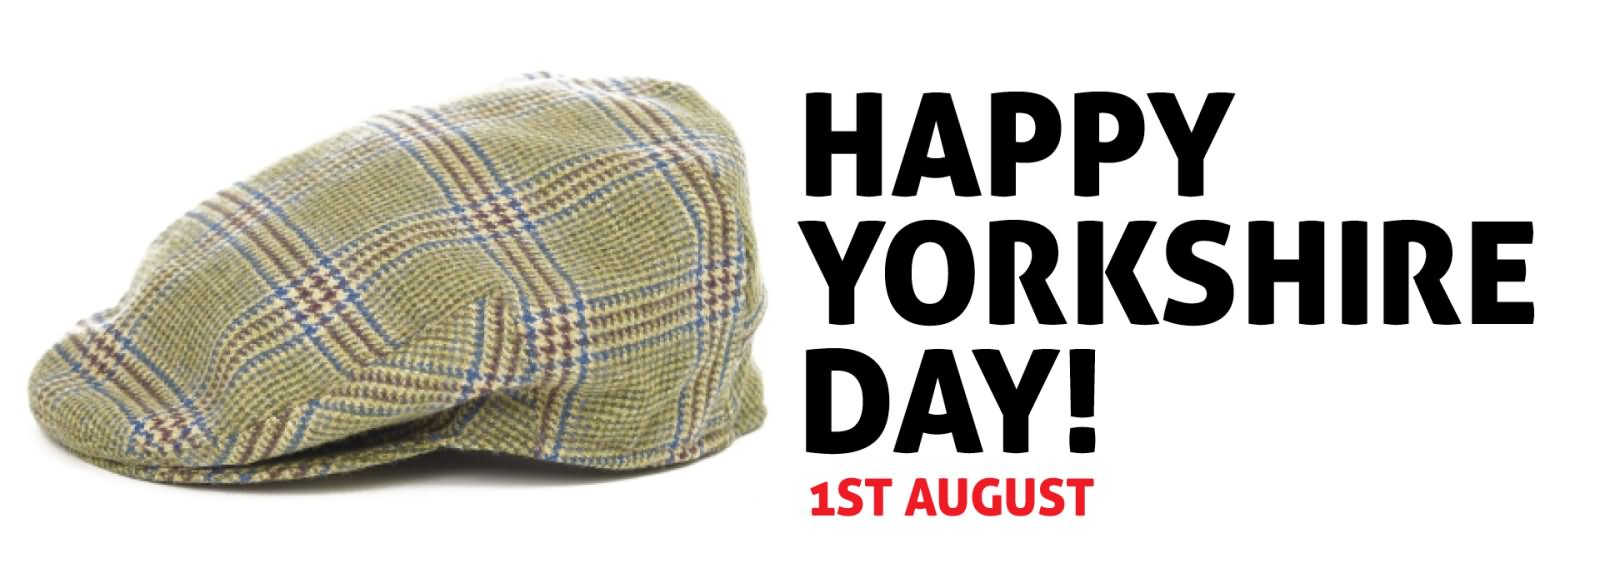 30 Most Beautiful Happy Yorkshire Day Wish Pictures And Images